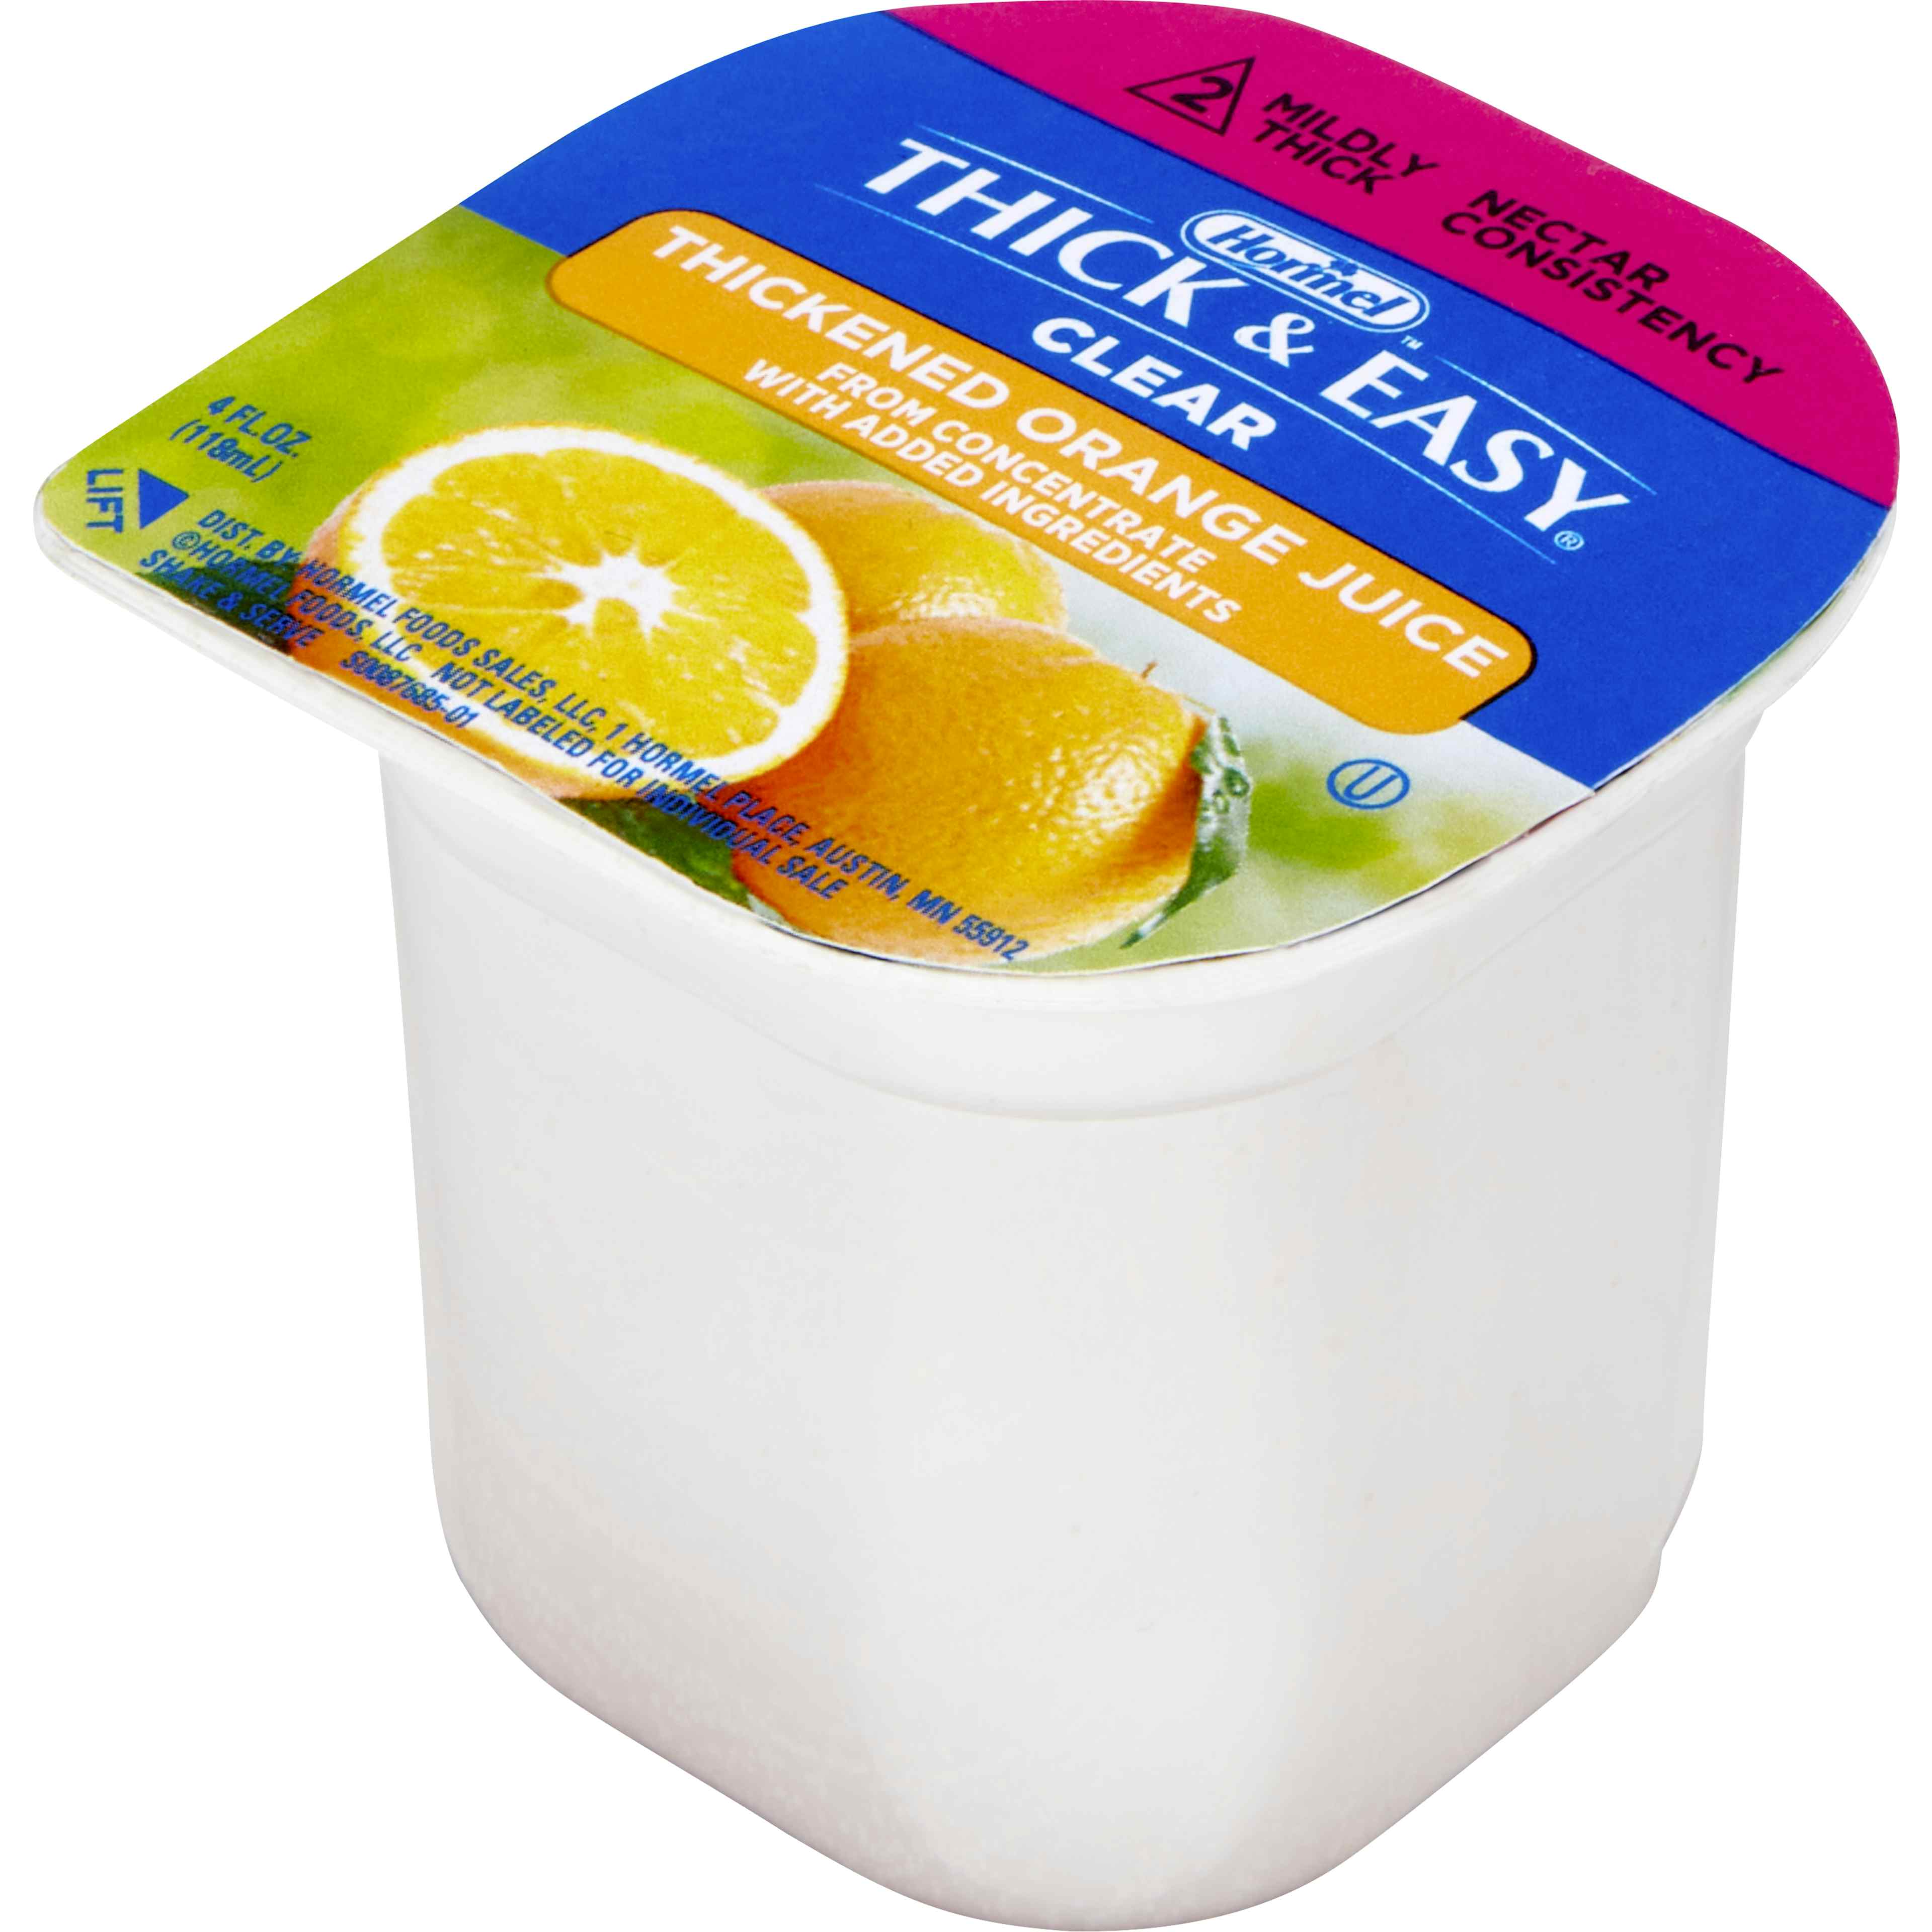 Thick & Easy Ready to Use Thickened Beverage, Orange Juice Flavor, 4 oz., Portion Cup